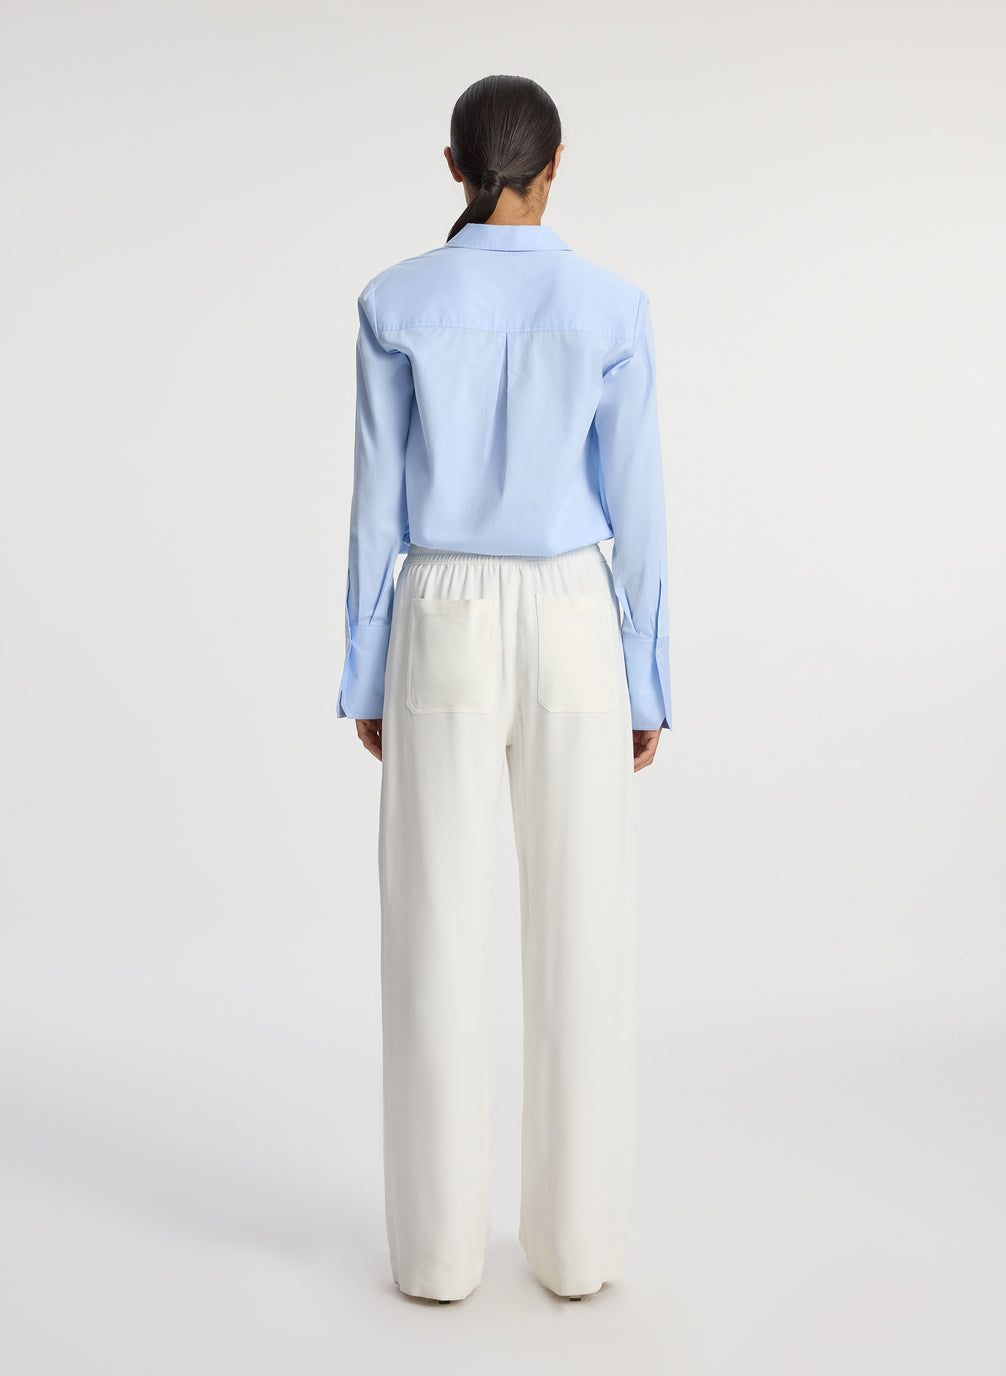 back view of woman wearing light blue button down collared shirt and white pants